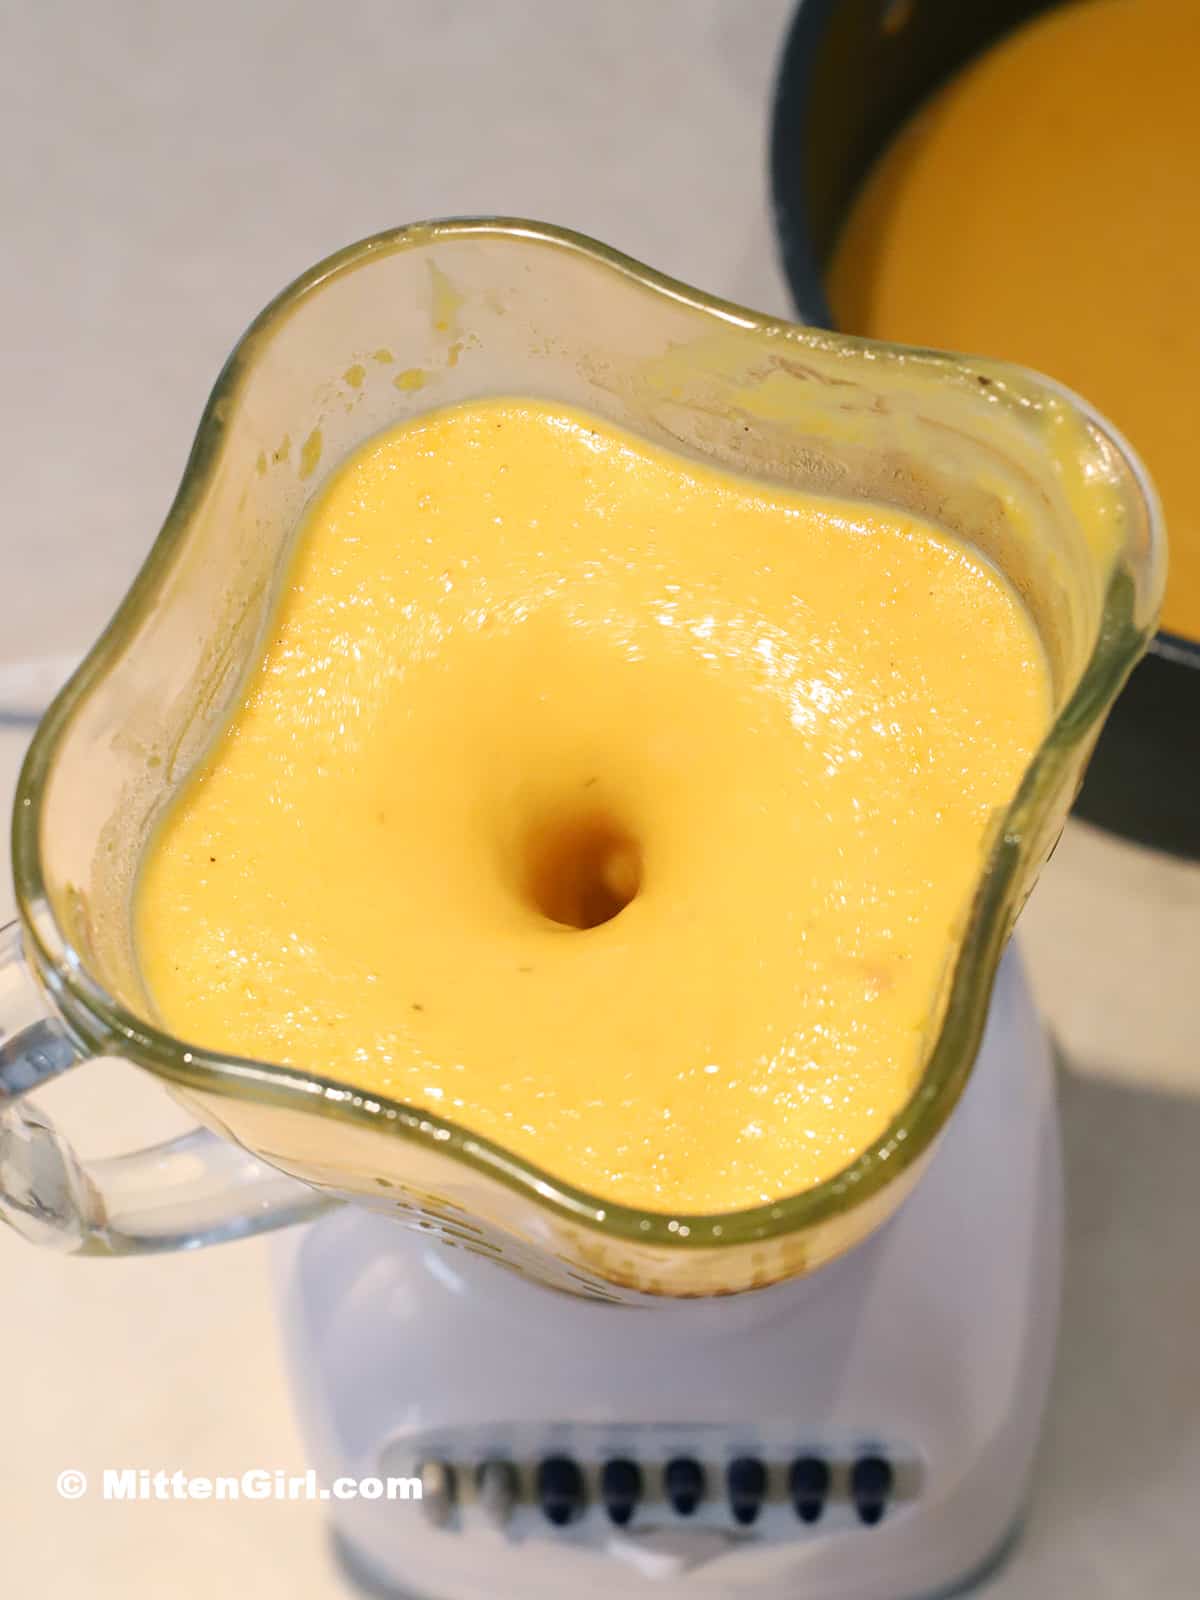 Soup being blended in a countertop blender.